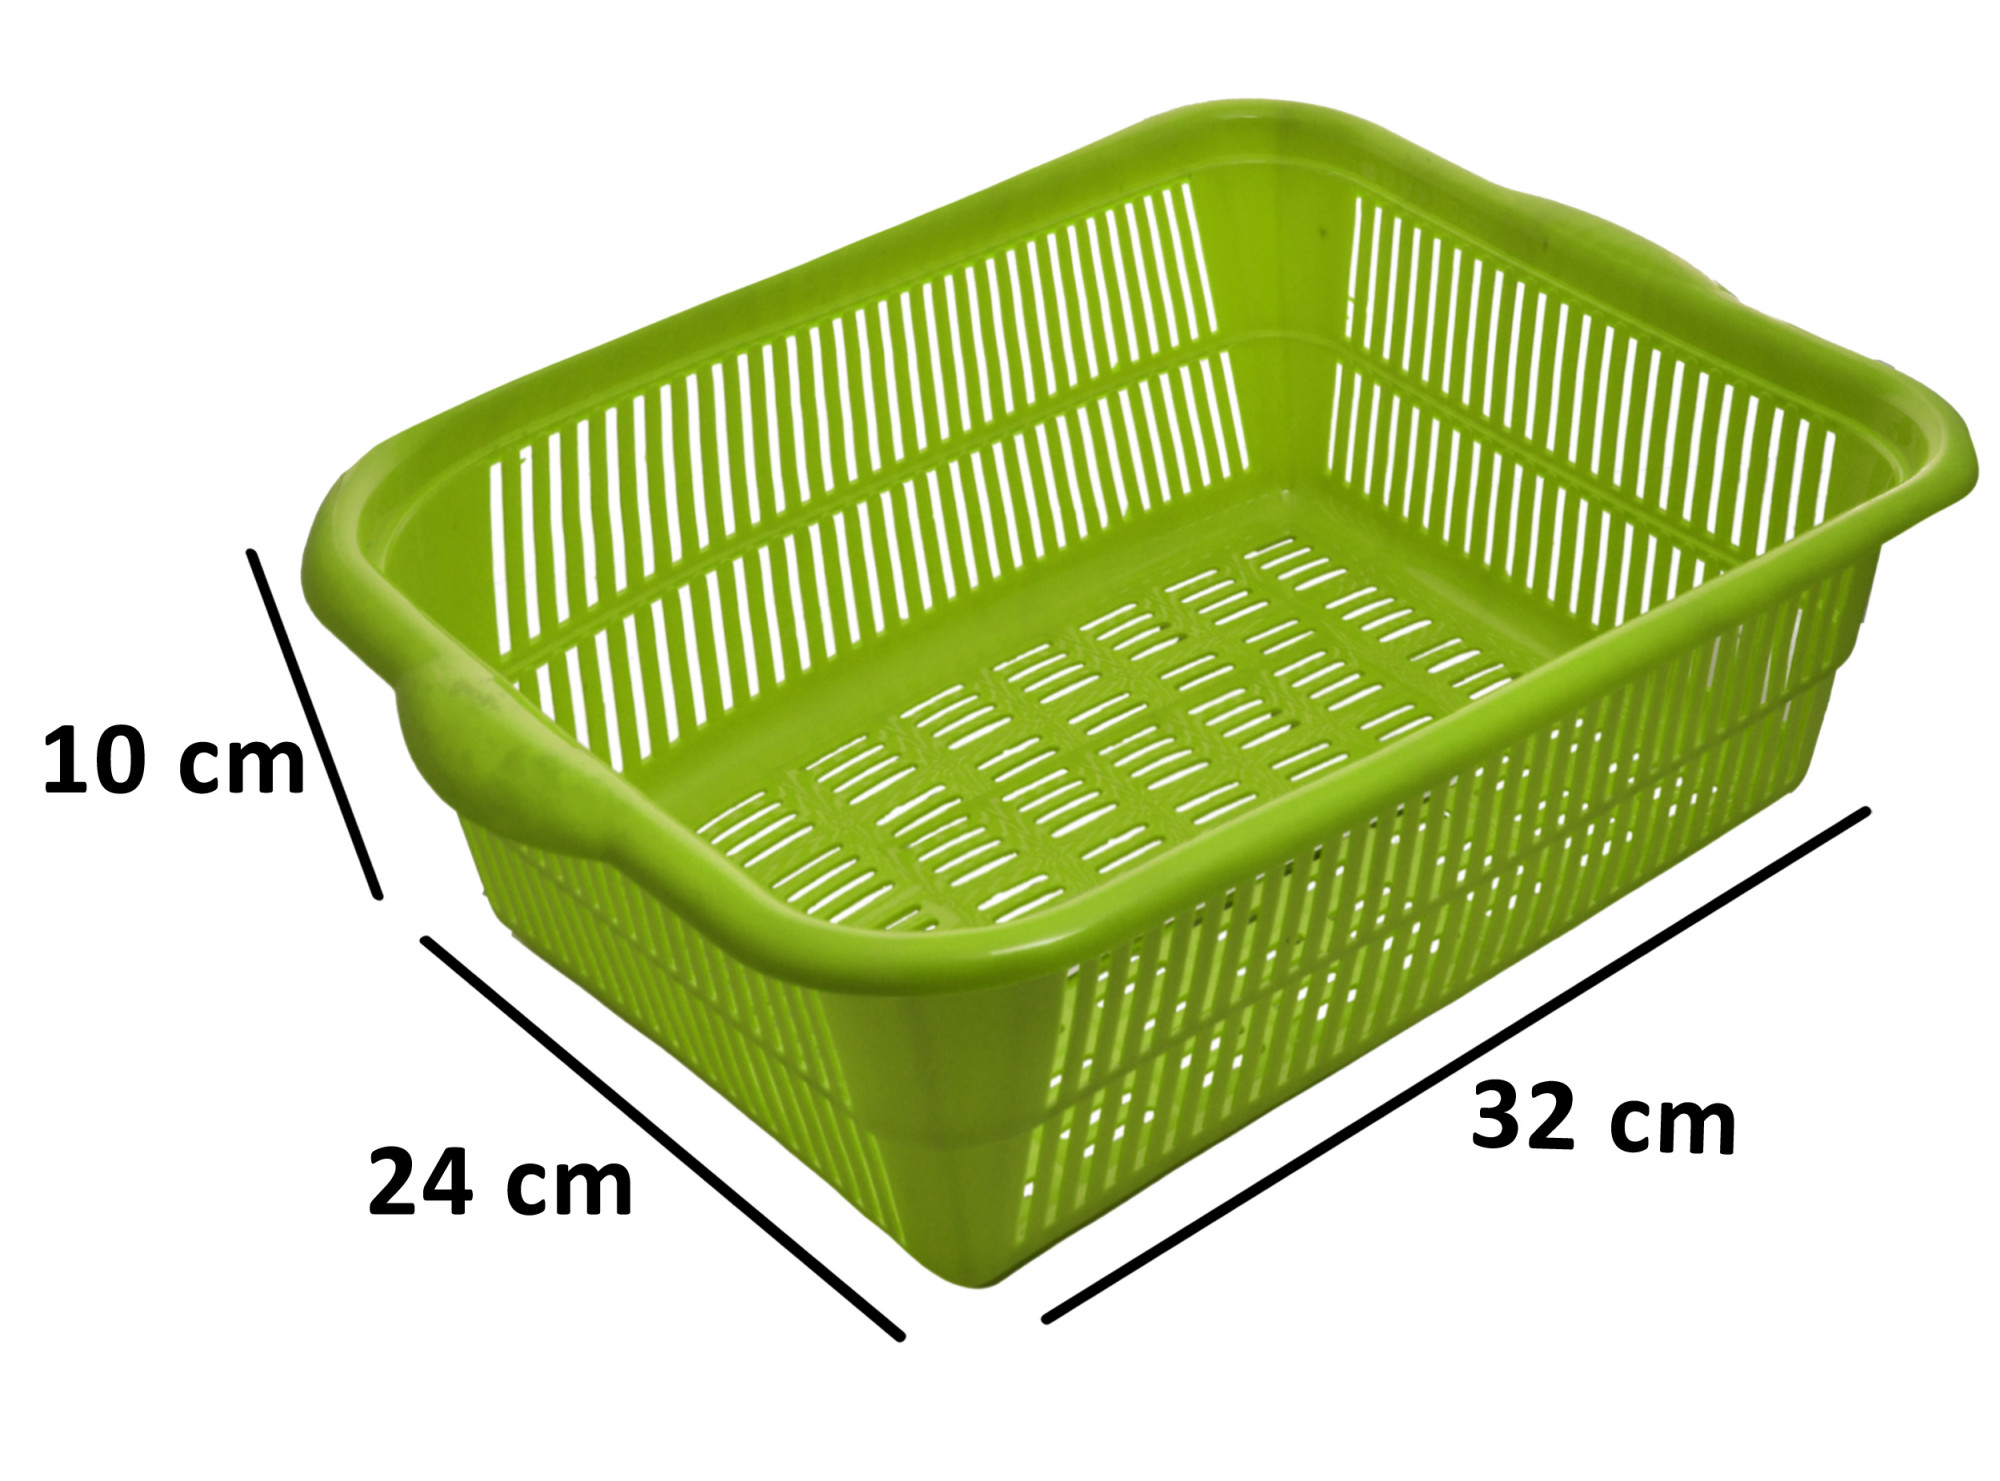 Kuber Industries Plastic Kitchen Dish Rack Drainer Vegetables And Fruits Basket Dish Rack Multipurpose Organizers ,Small Size,Green & Yellow